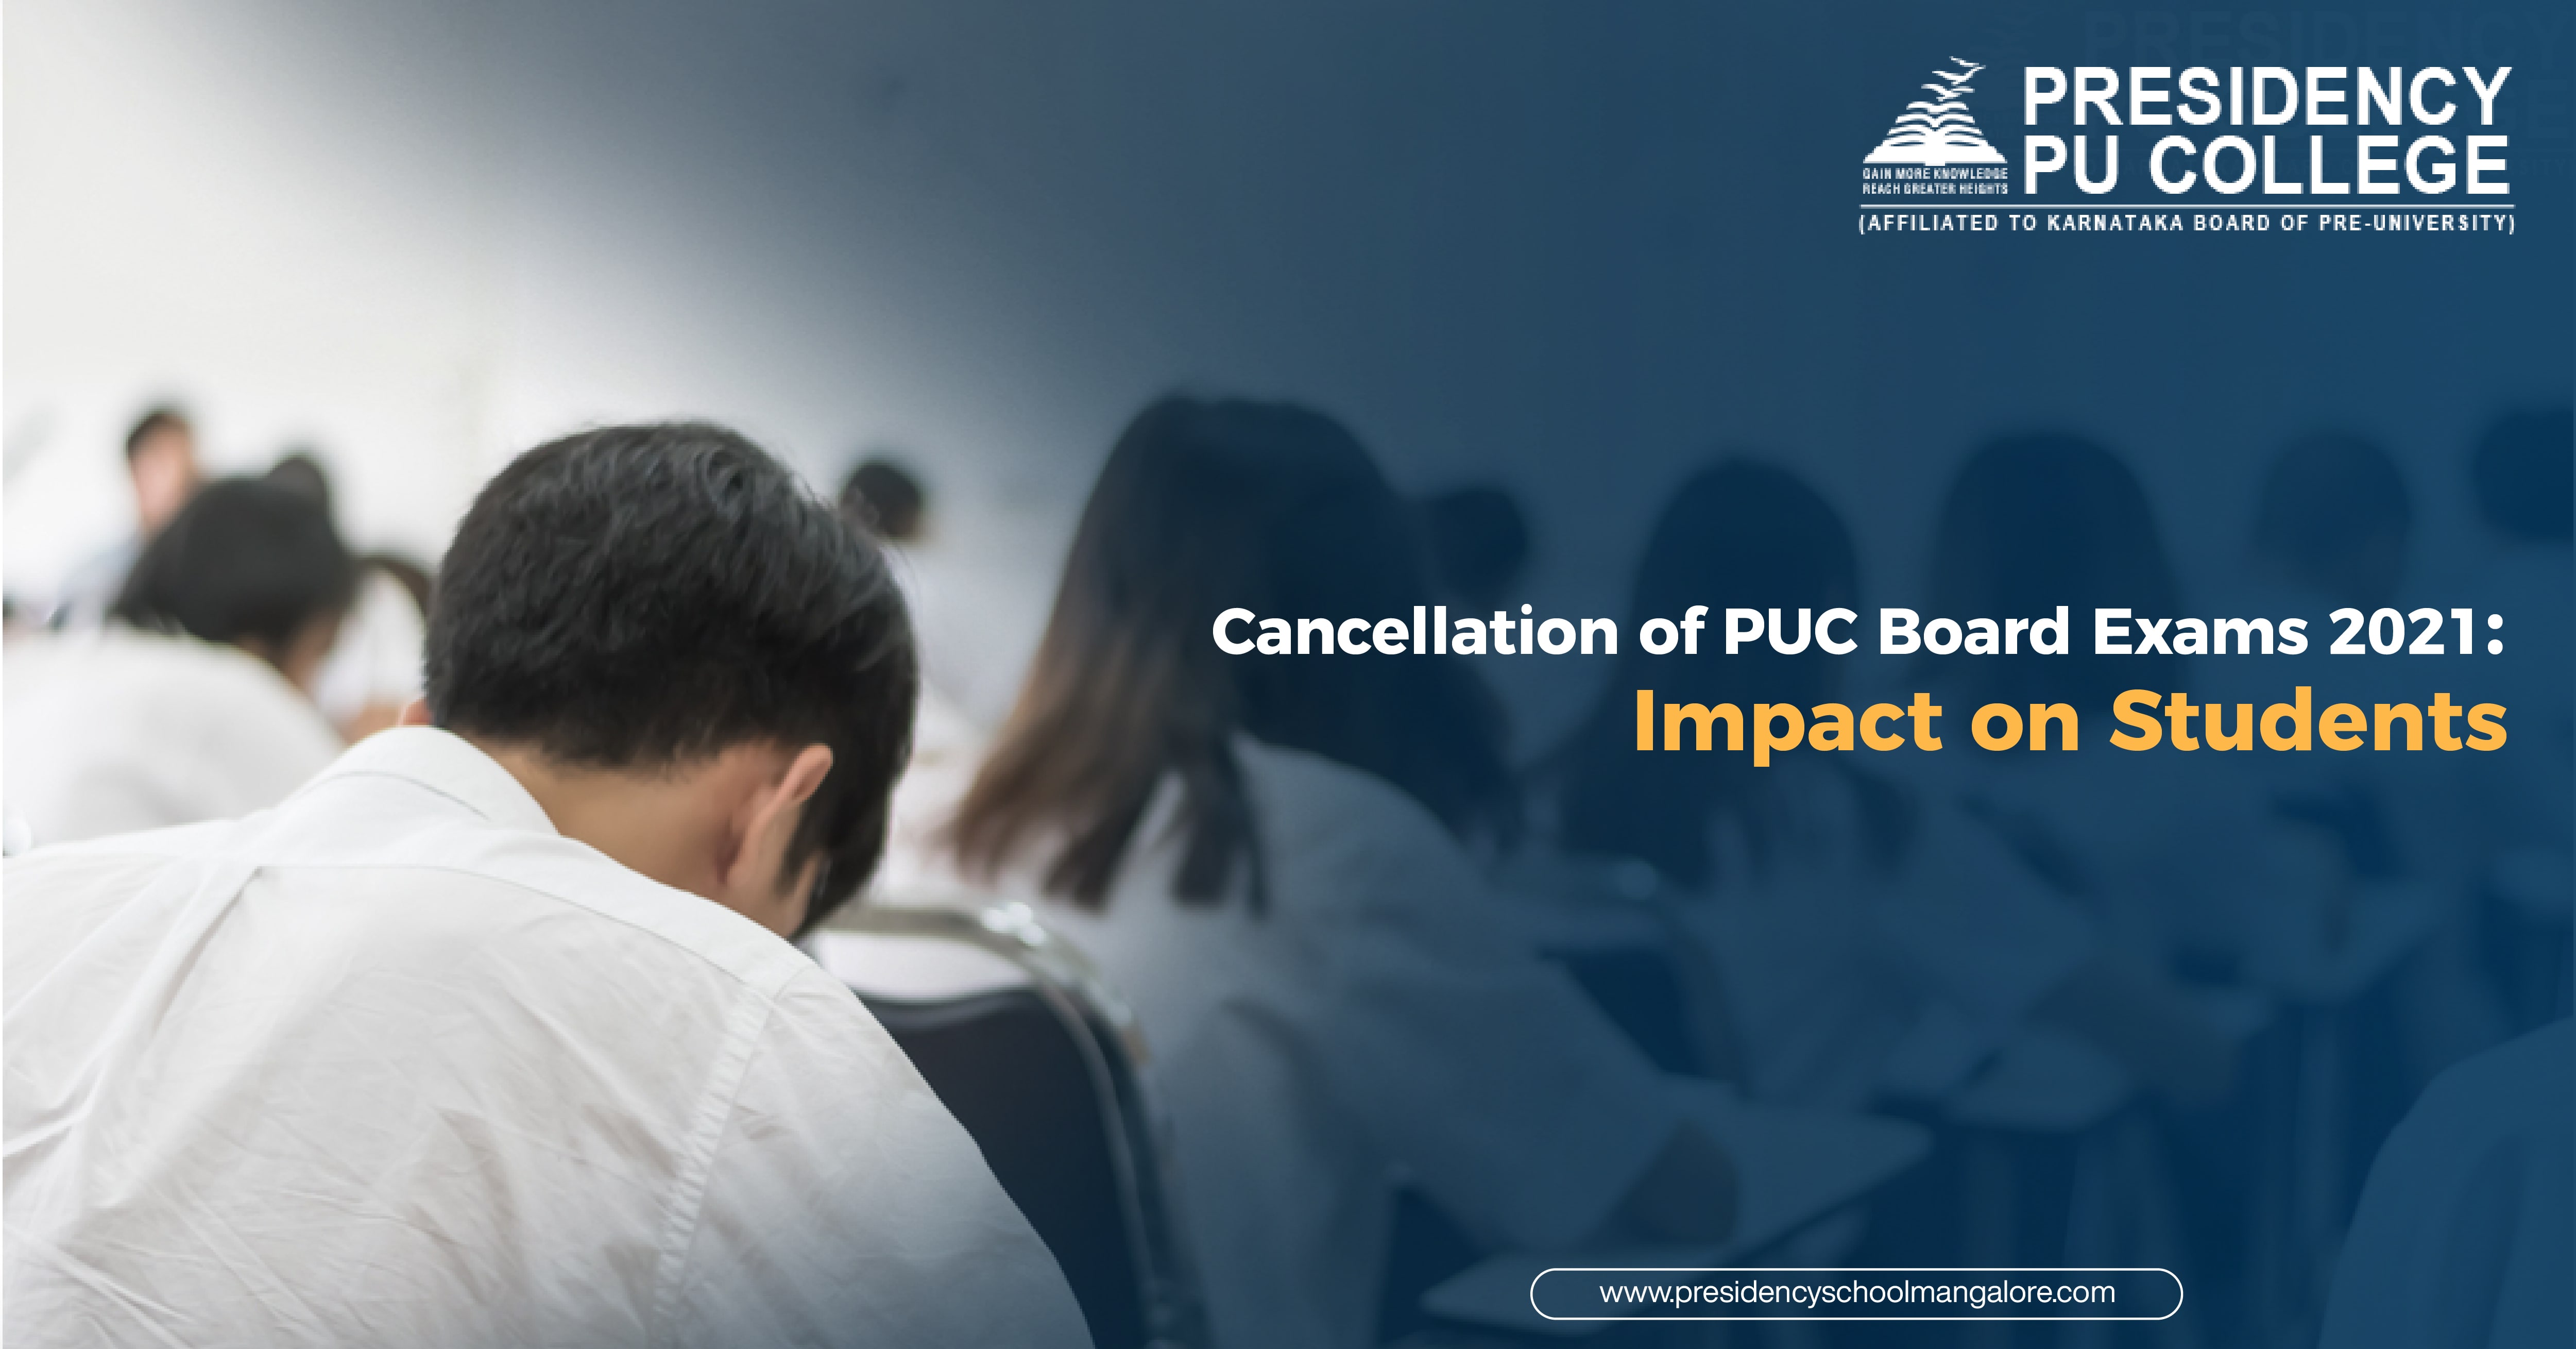 Cancellation of PUC Board Exams